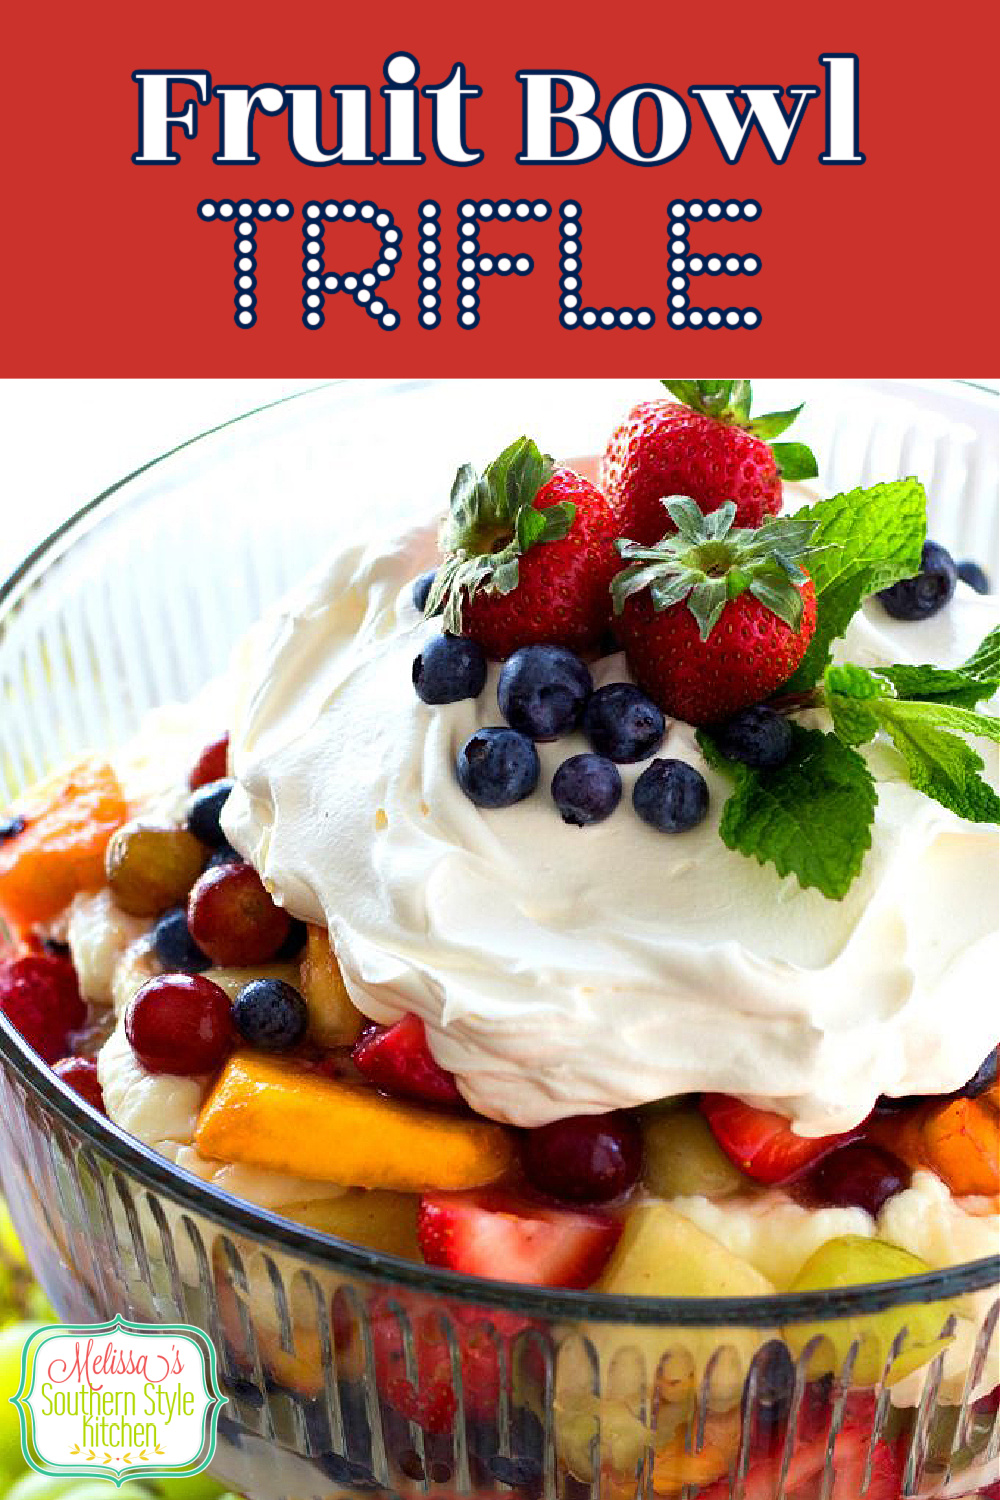 This luscious Fruit Salad Trifle is layered with a luscious cheesecake-like filling #fruitsalad #fruit #mixedfruit #punchbowl #fruitsaladtrifle #fruitsaladrecipes #berrysalad #sweets #desserts #trifles #dessertdoodrecipes #triflerecipes #southernfood #southernrecipes